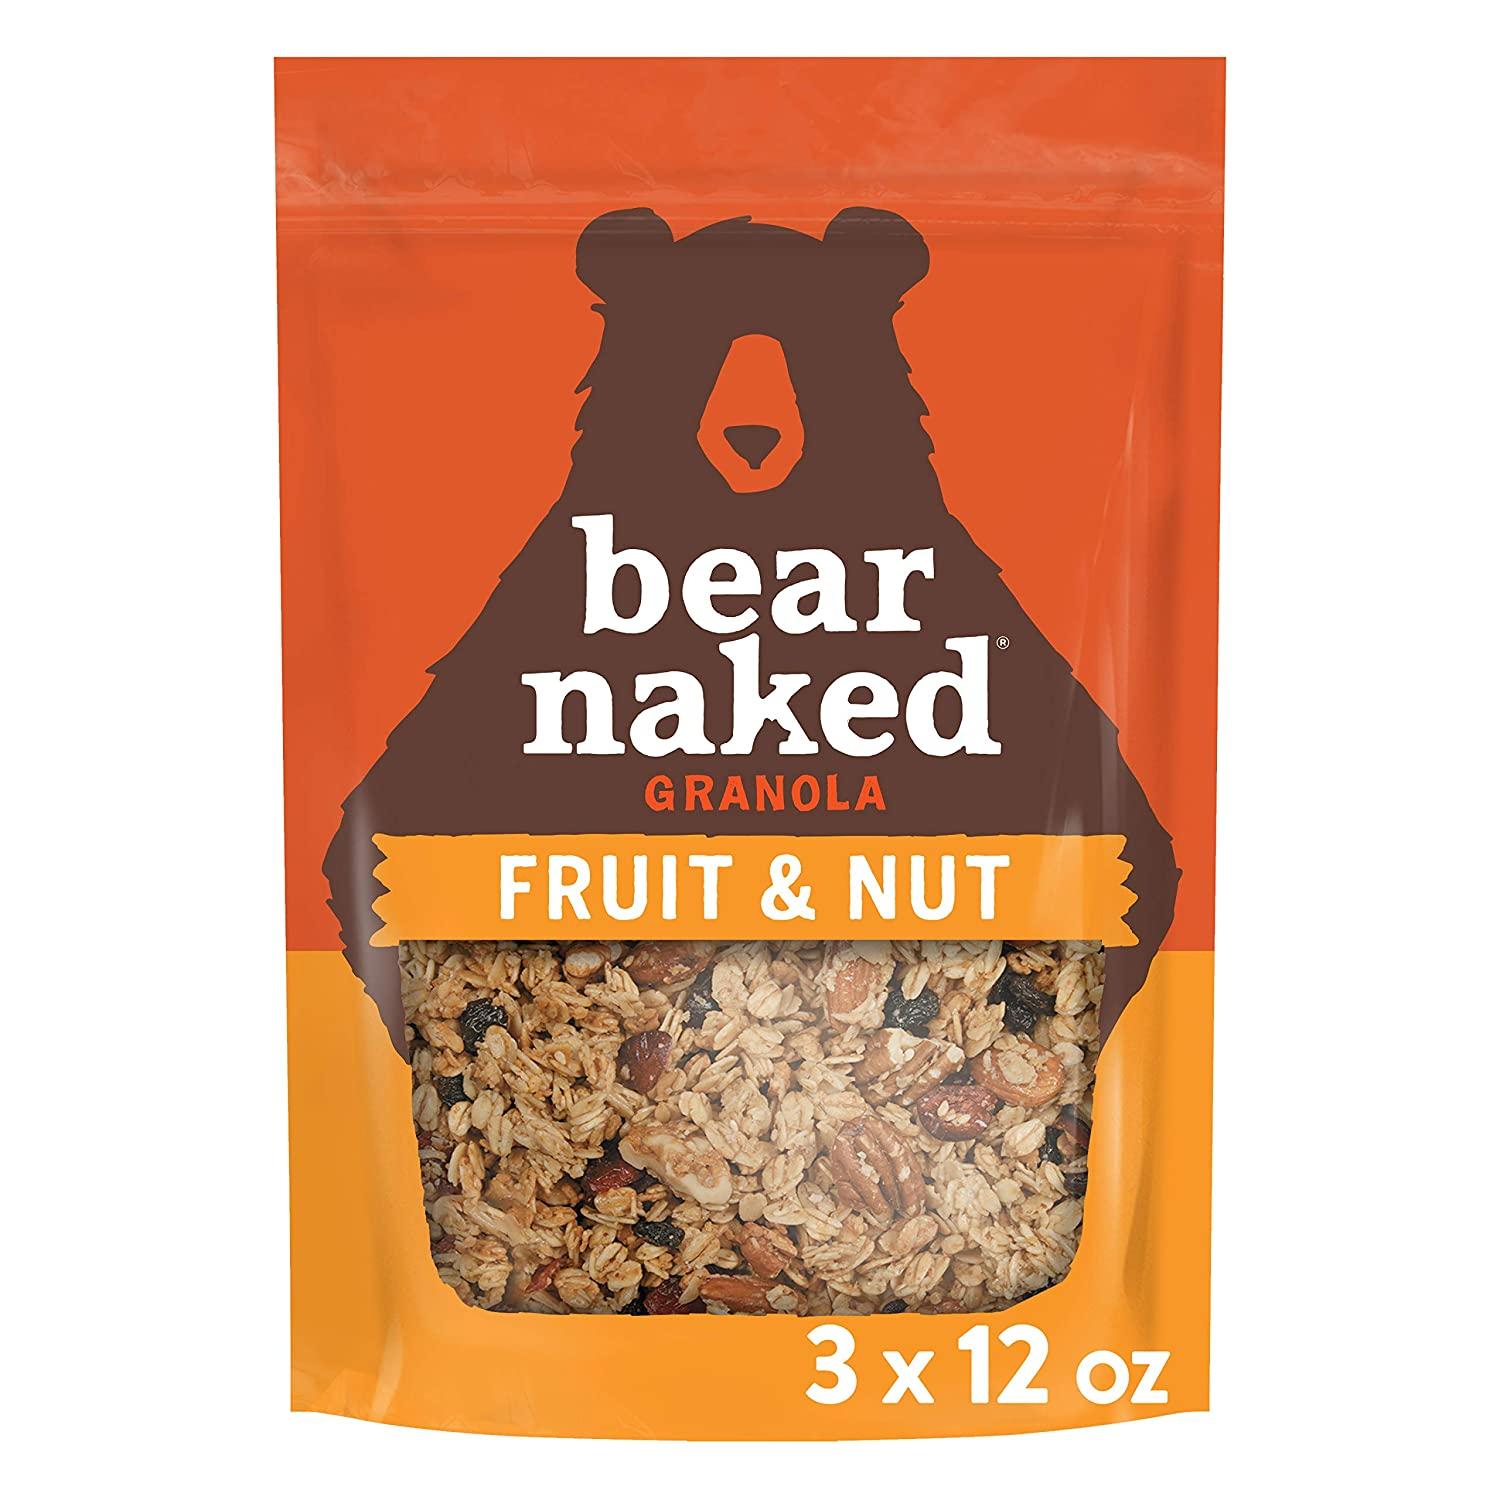 3 Bear Naked Fruit and Nut Granola for $7.87 Shipped